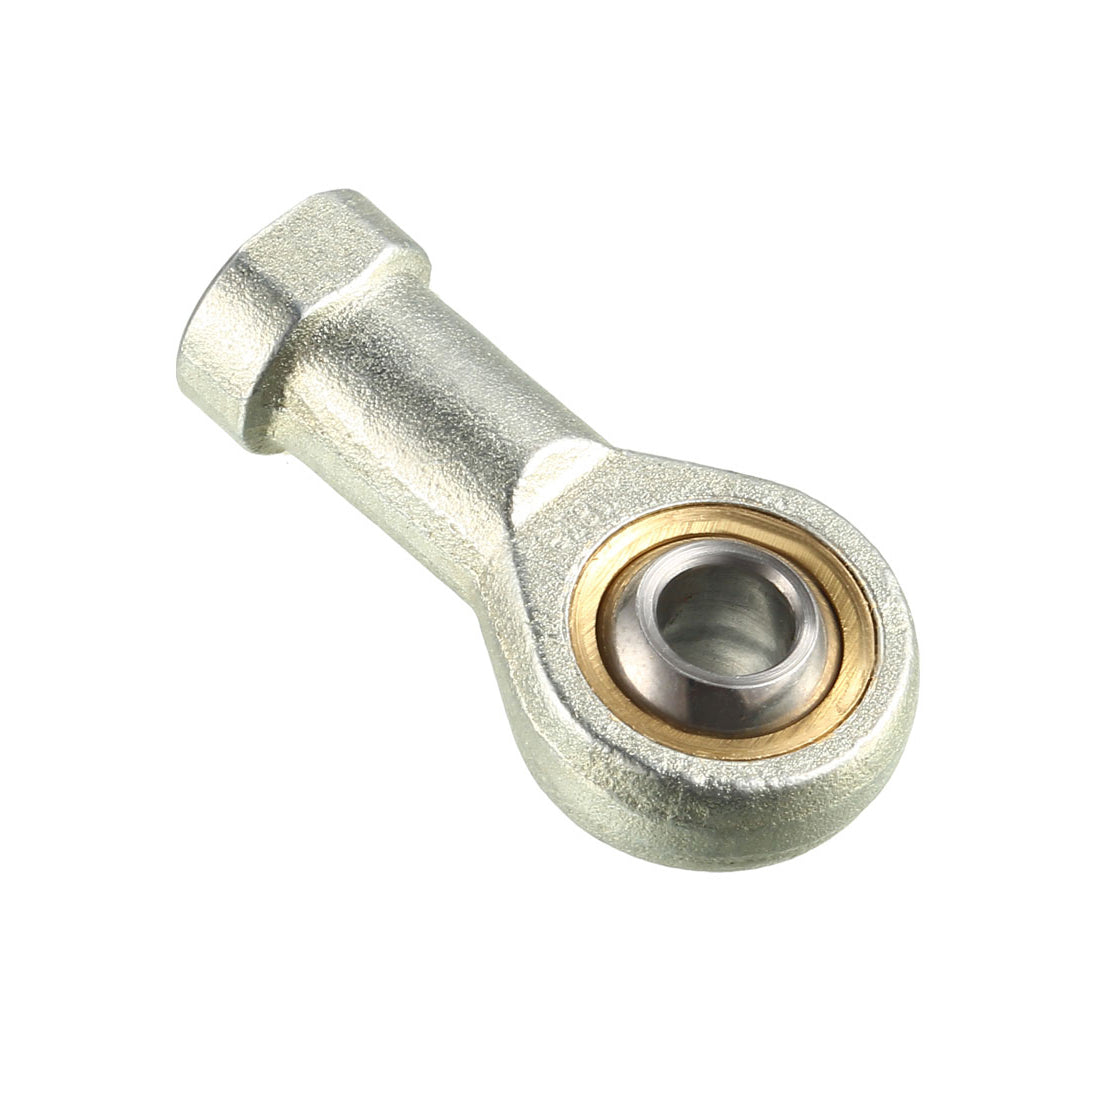 uxcell Uxcell 8mm Rod End Bearing M8x1.25mm Rod Ends Ball Joint Female Right Hand Thread